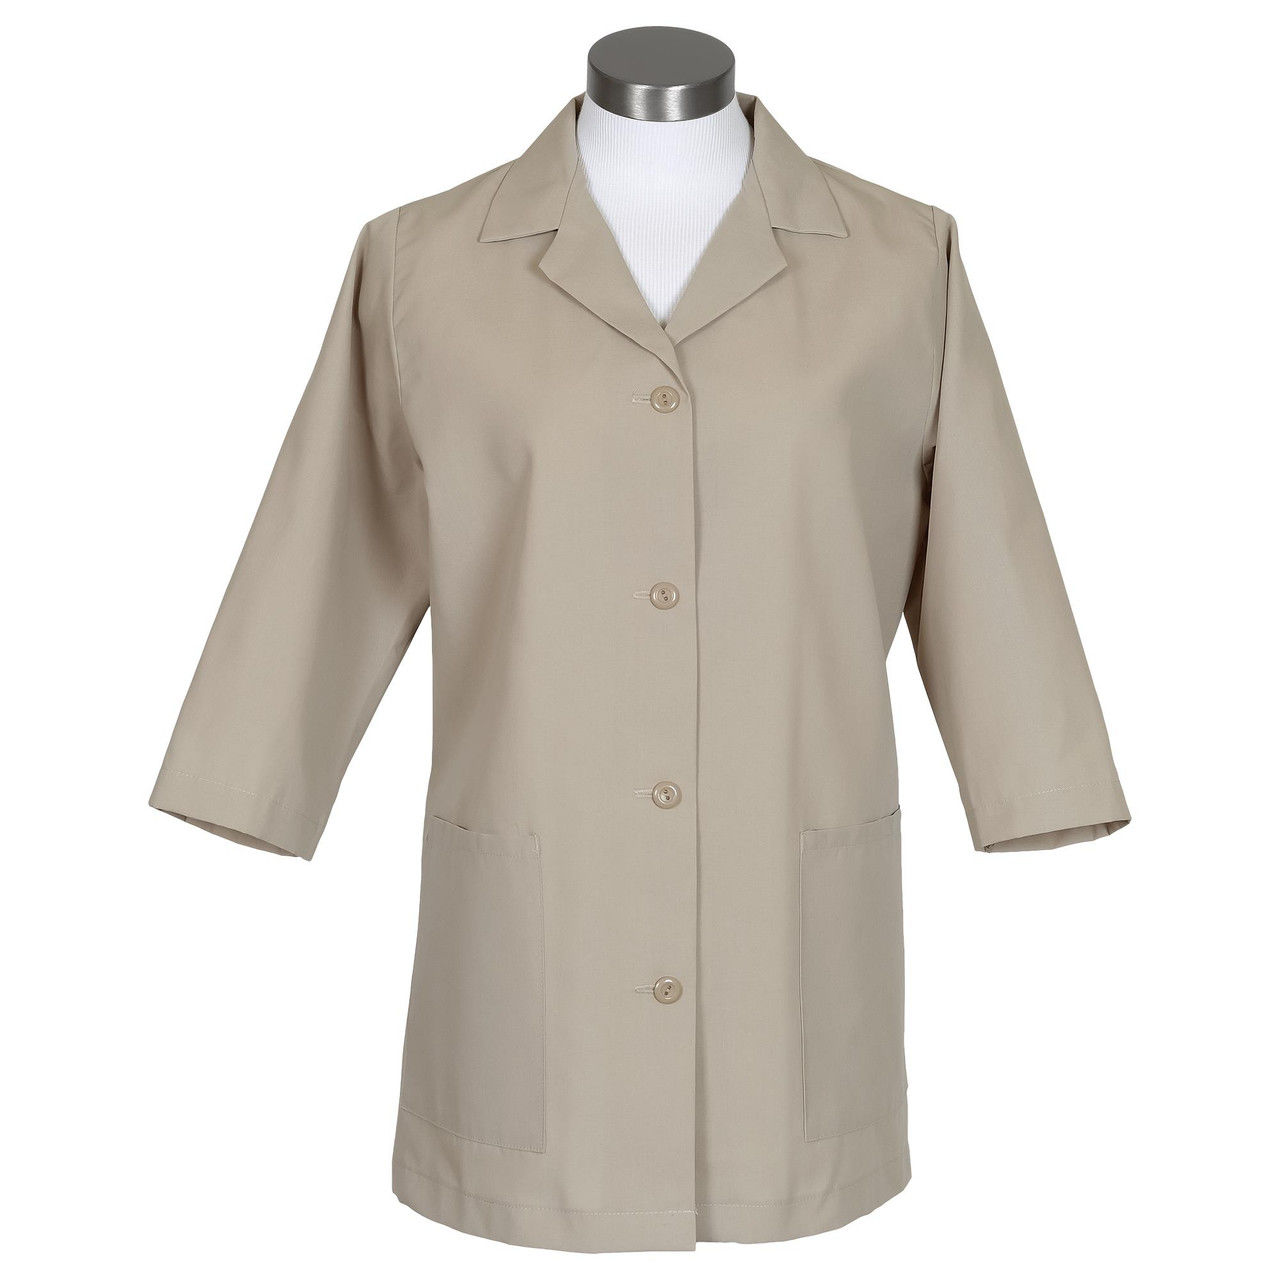 Can you specify the extra features of the tan smock in the Female Smock, Tan, Fame 72 product?